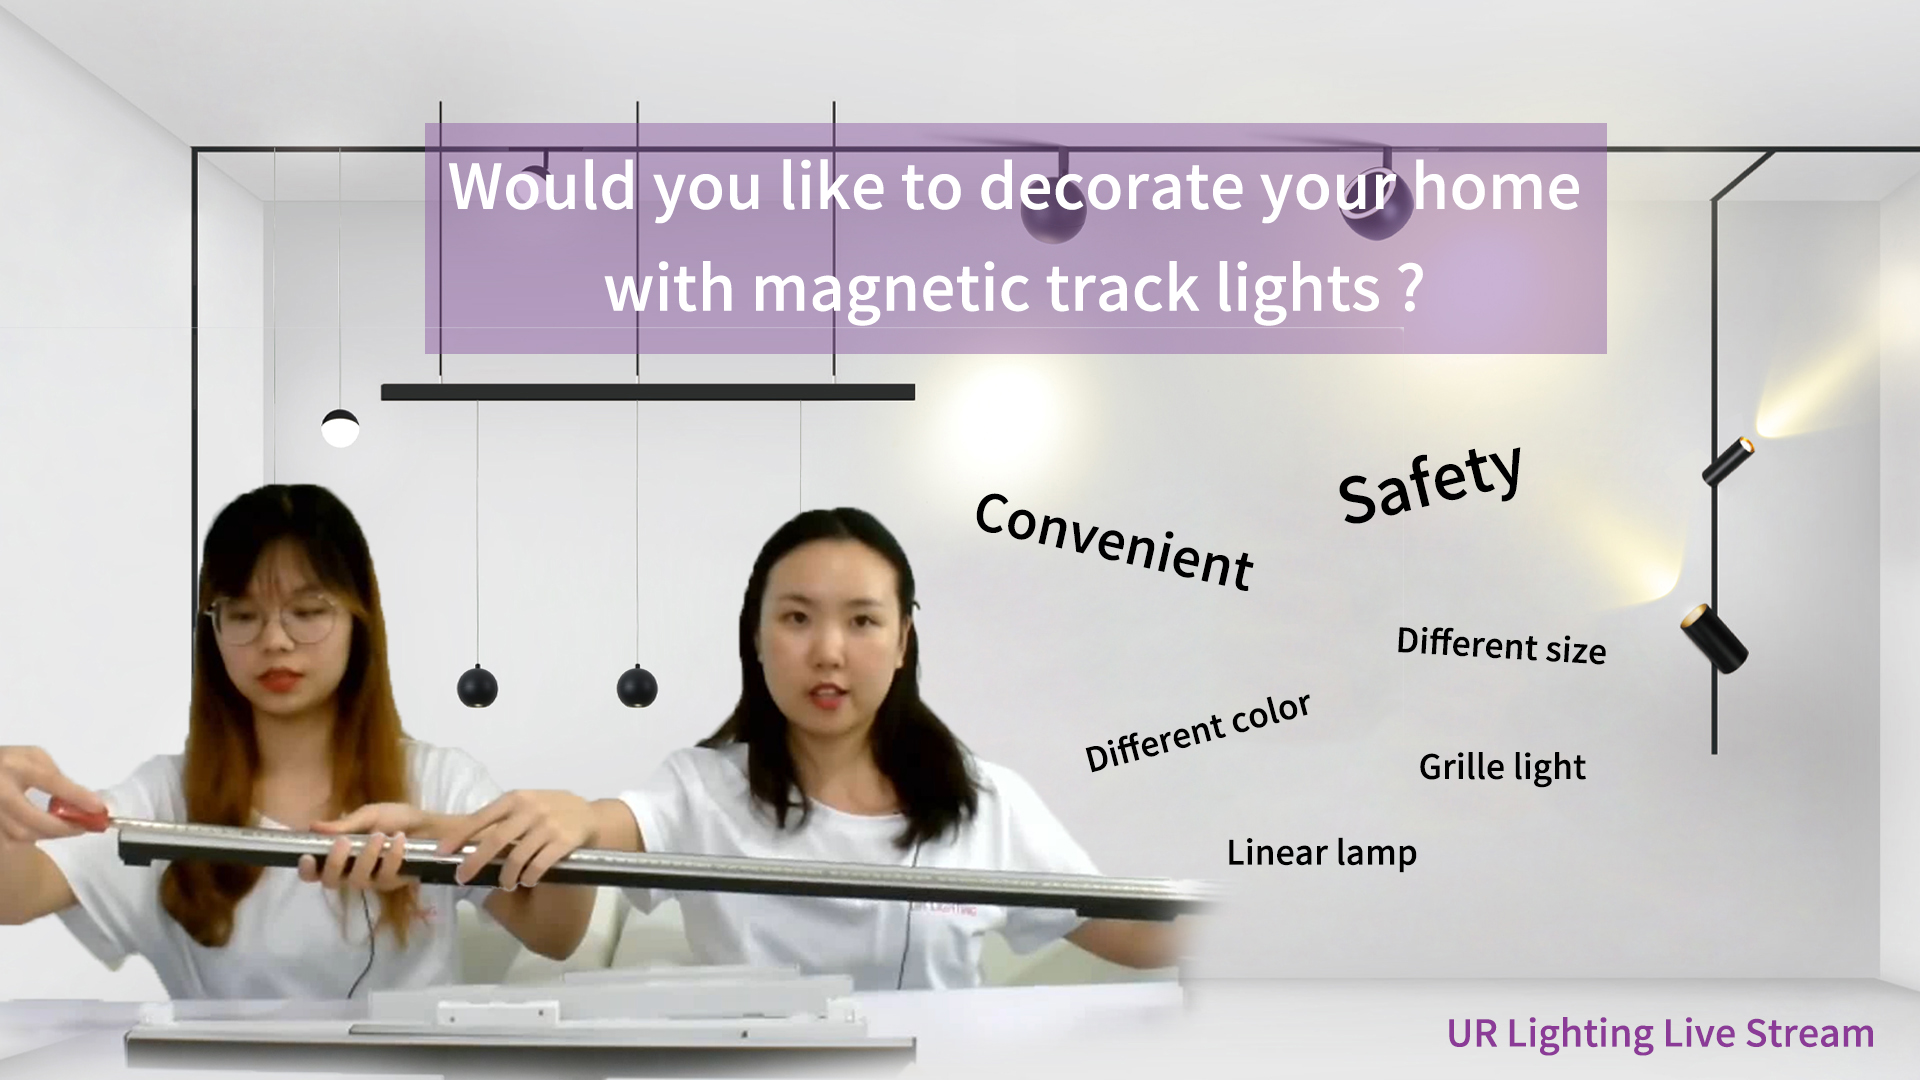 Would you like to decorate your home with magnetic track lights?